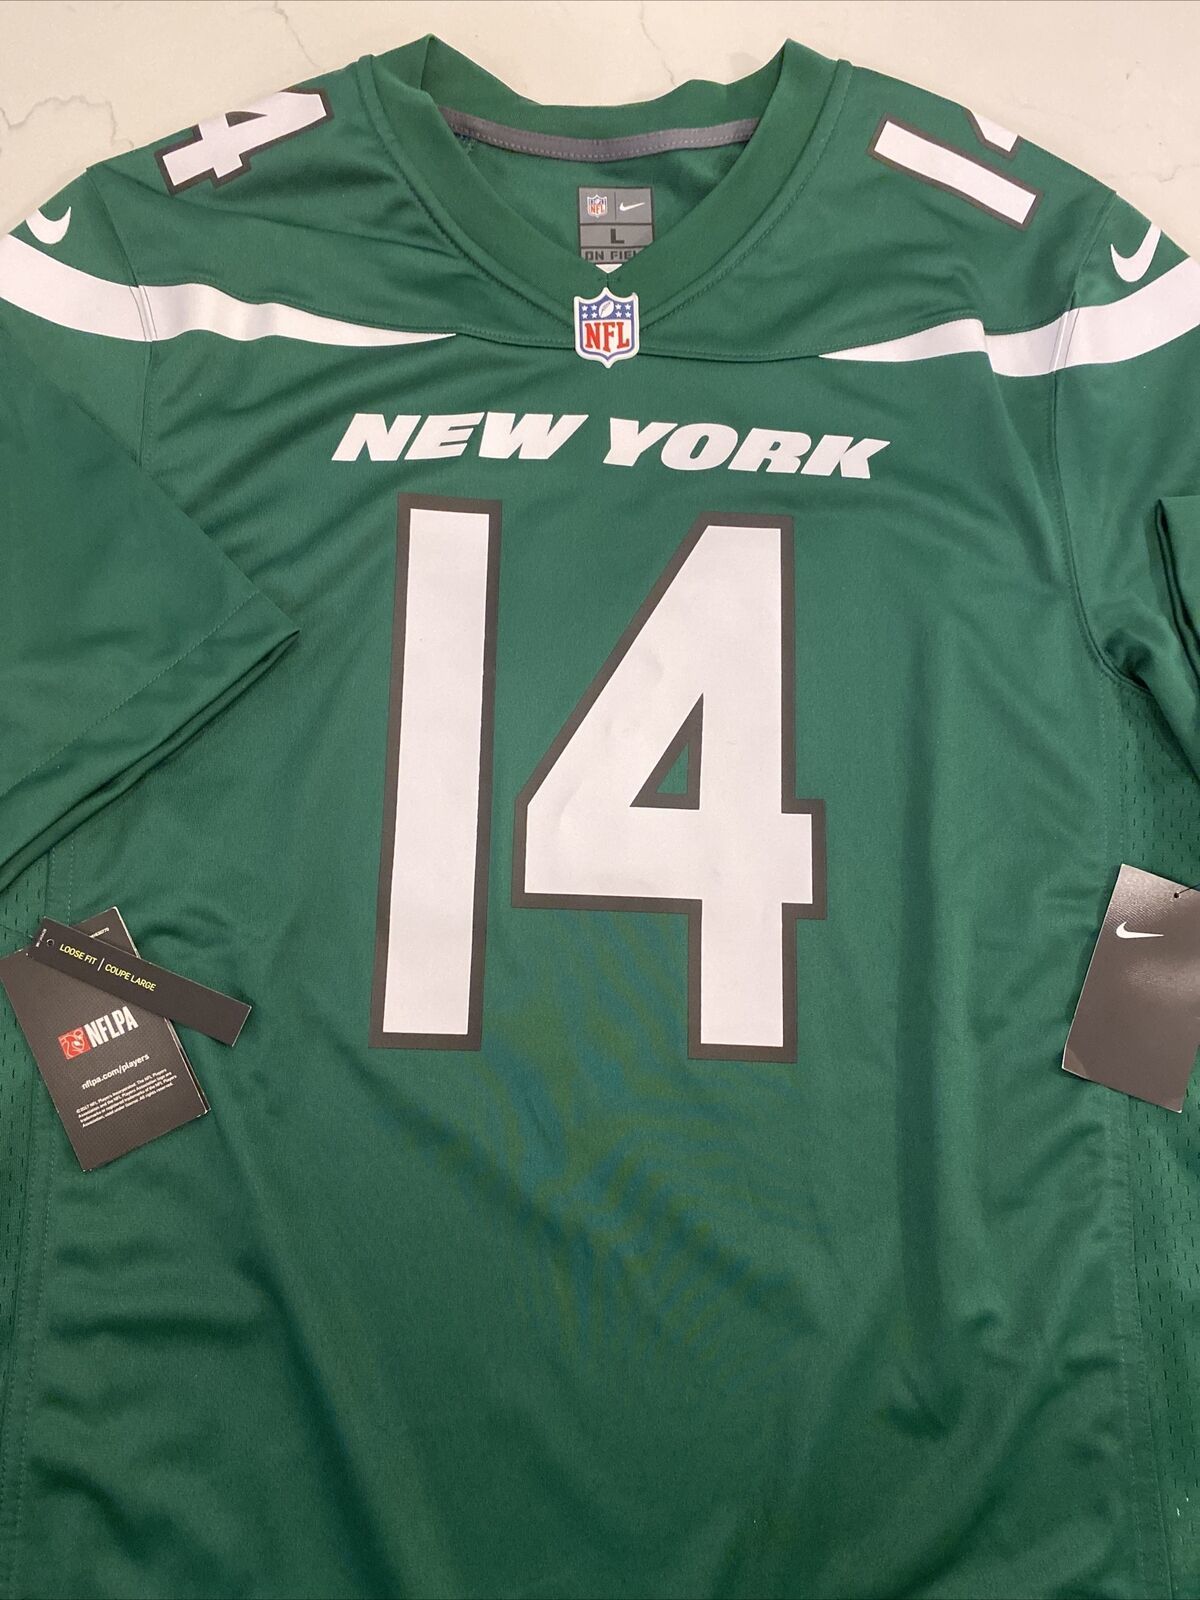 Primary image for New York Jets Adult Sam Darnold 2019 Alternate Jersey SZ Large 913128 397